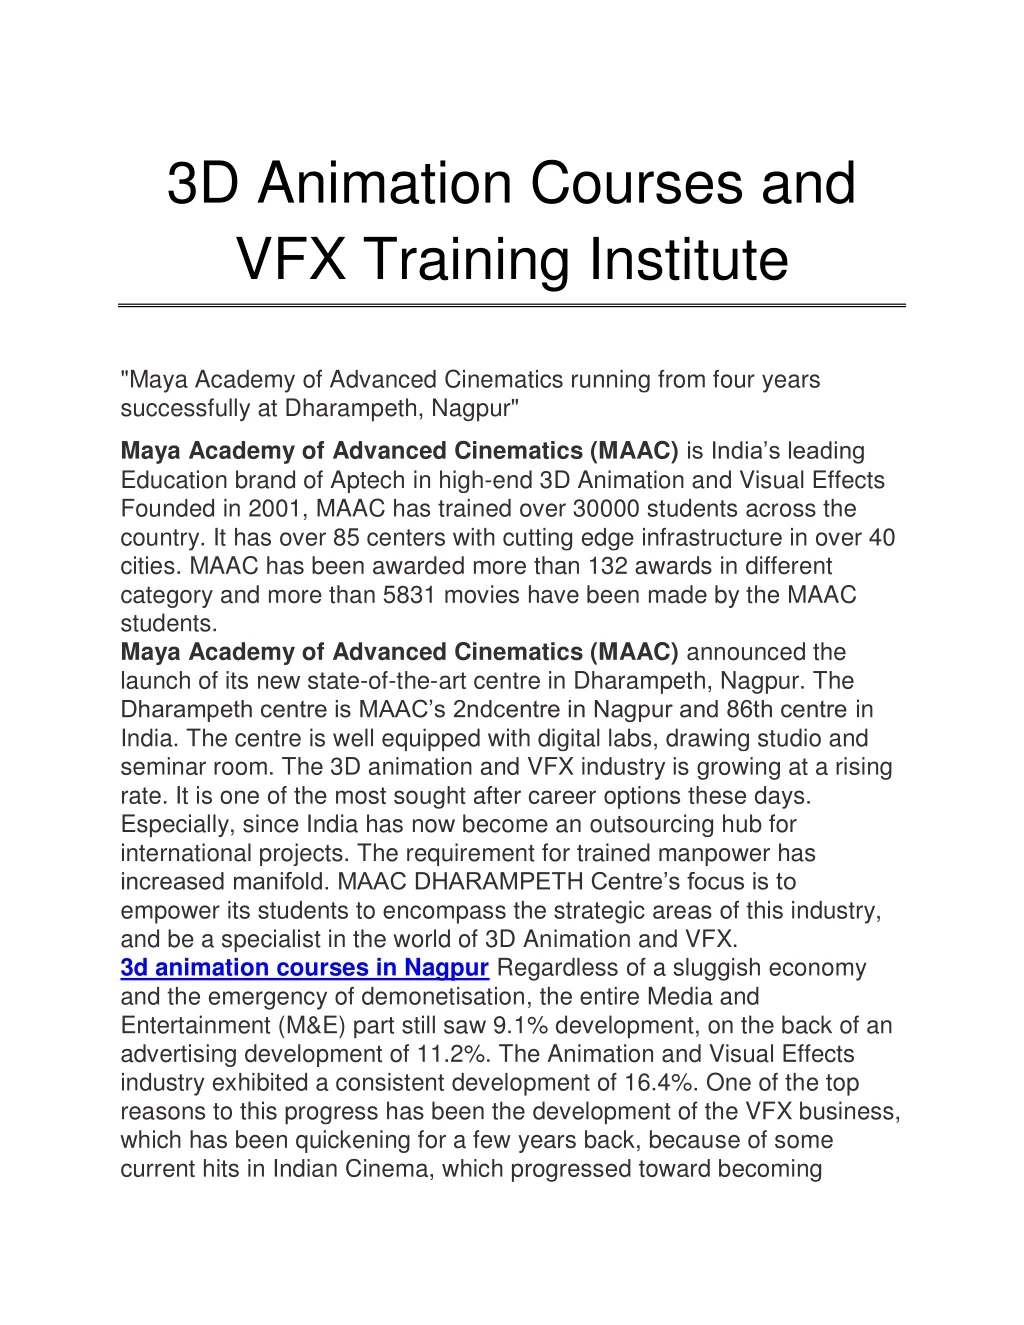 3d animation courses and vfx training institute